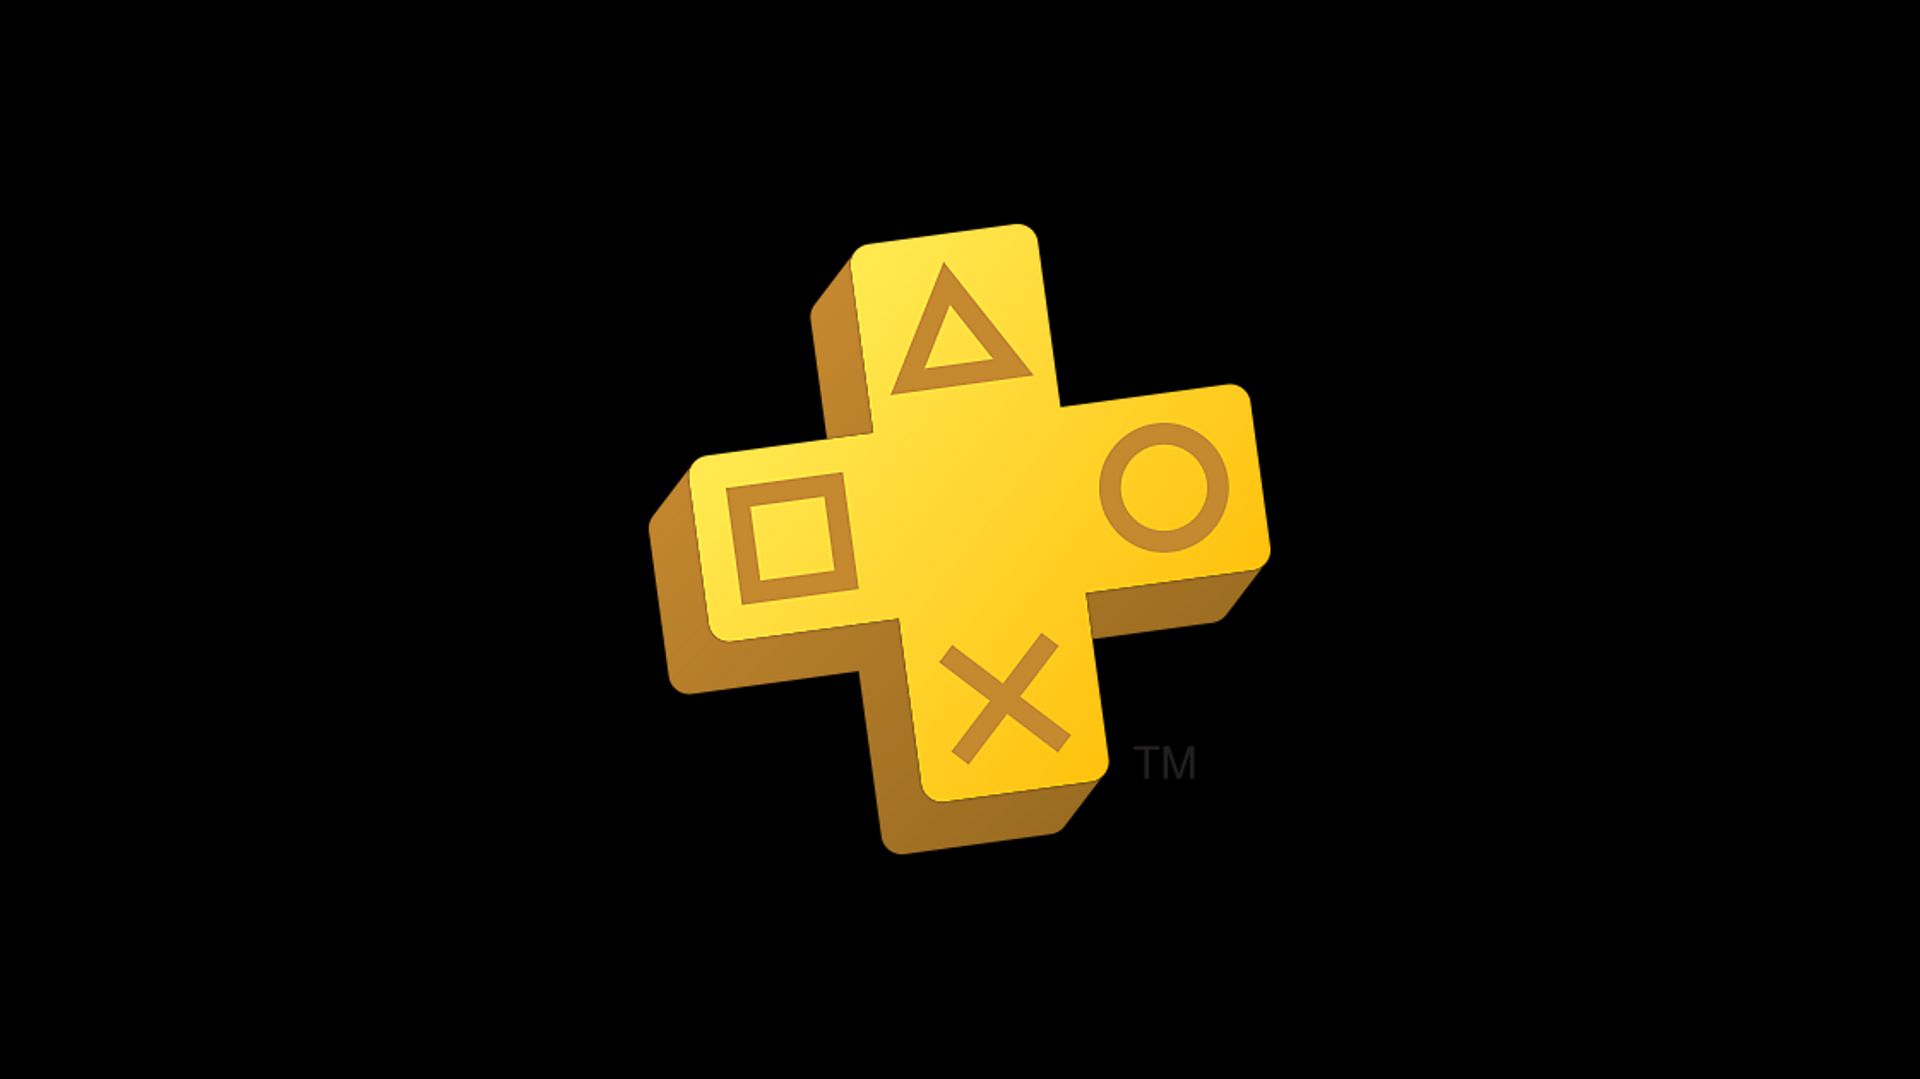 Sony exceeds number of promised PlayStation Plus catalogue games